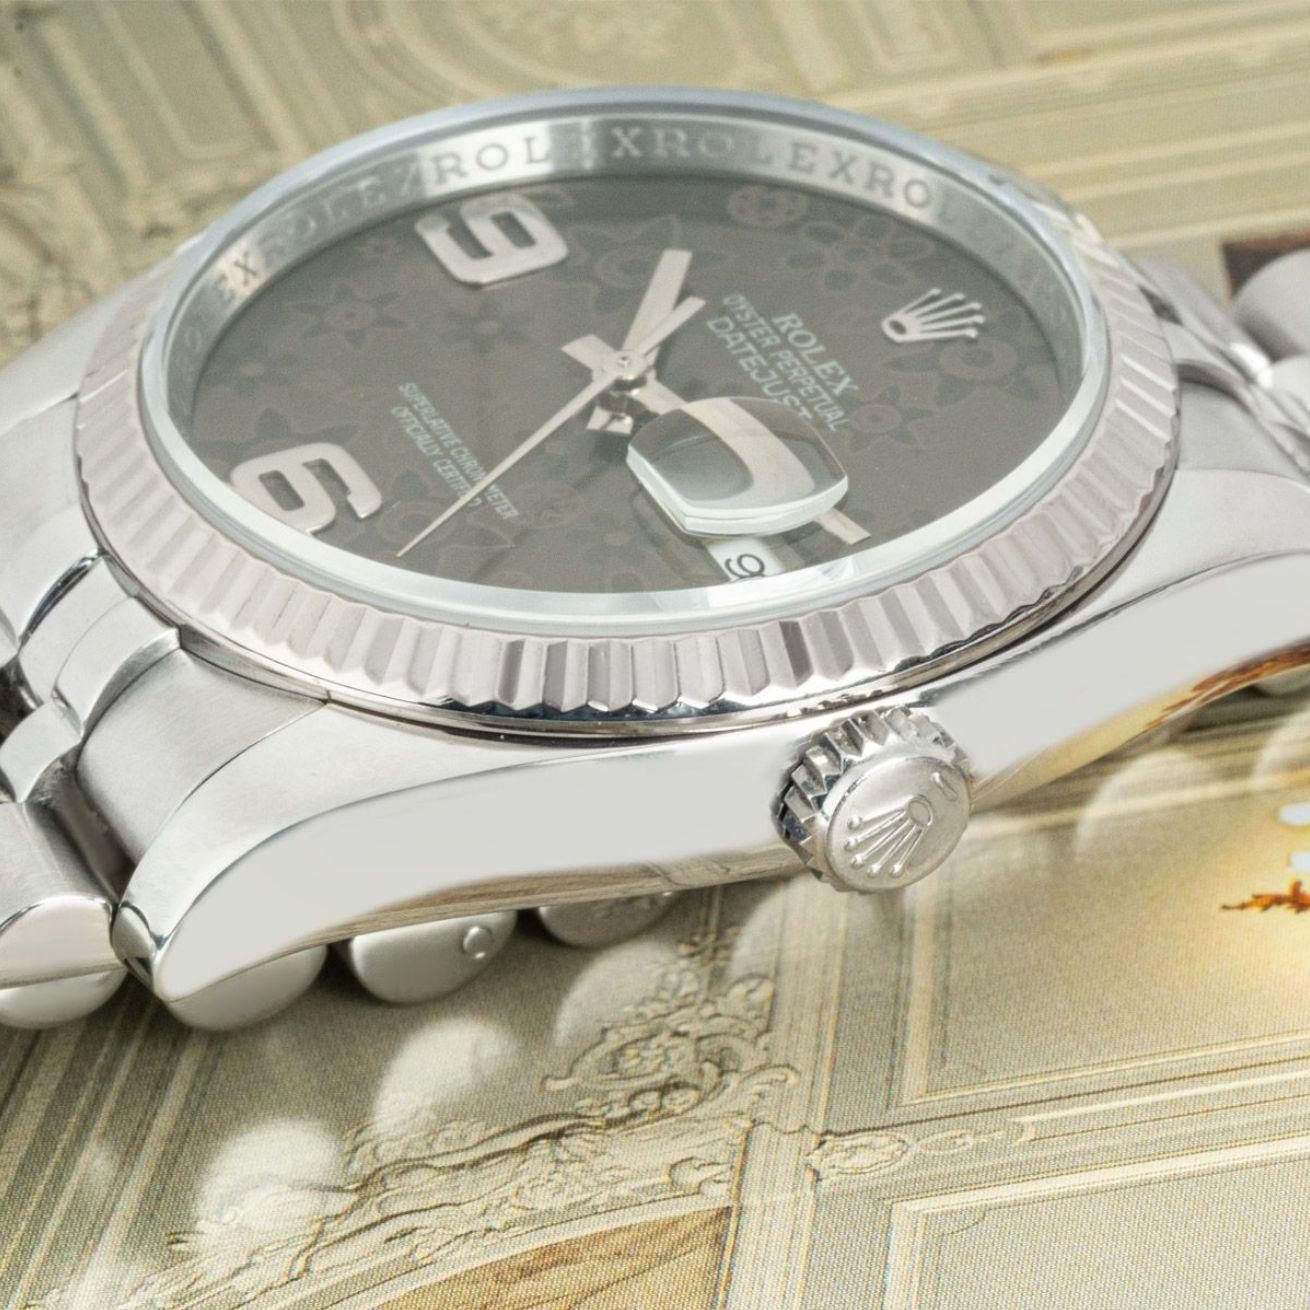 A stainless steel 36mm Datejust by Rolex. Featuring a grey floral dial and a white gold fluted bezel. The watch is fitted with a sapphire crystal, a self-winding automatic movement and a Jubilee bracelet equipped with a concealed Crown Clasp.

In